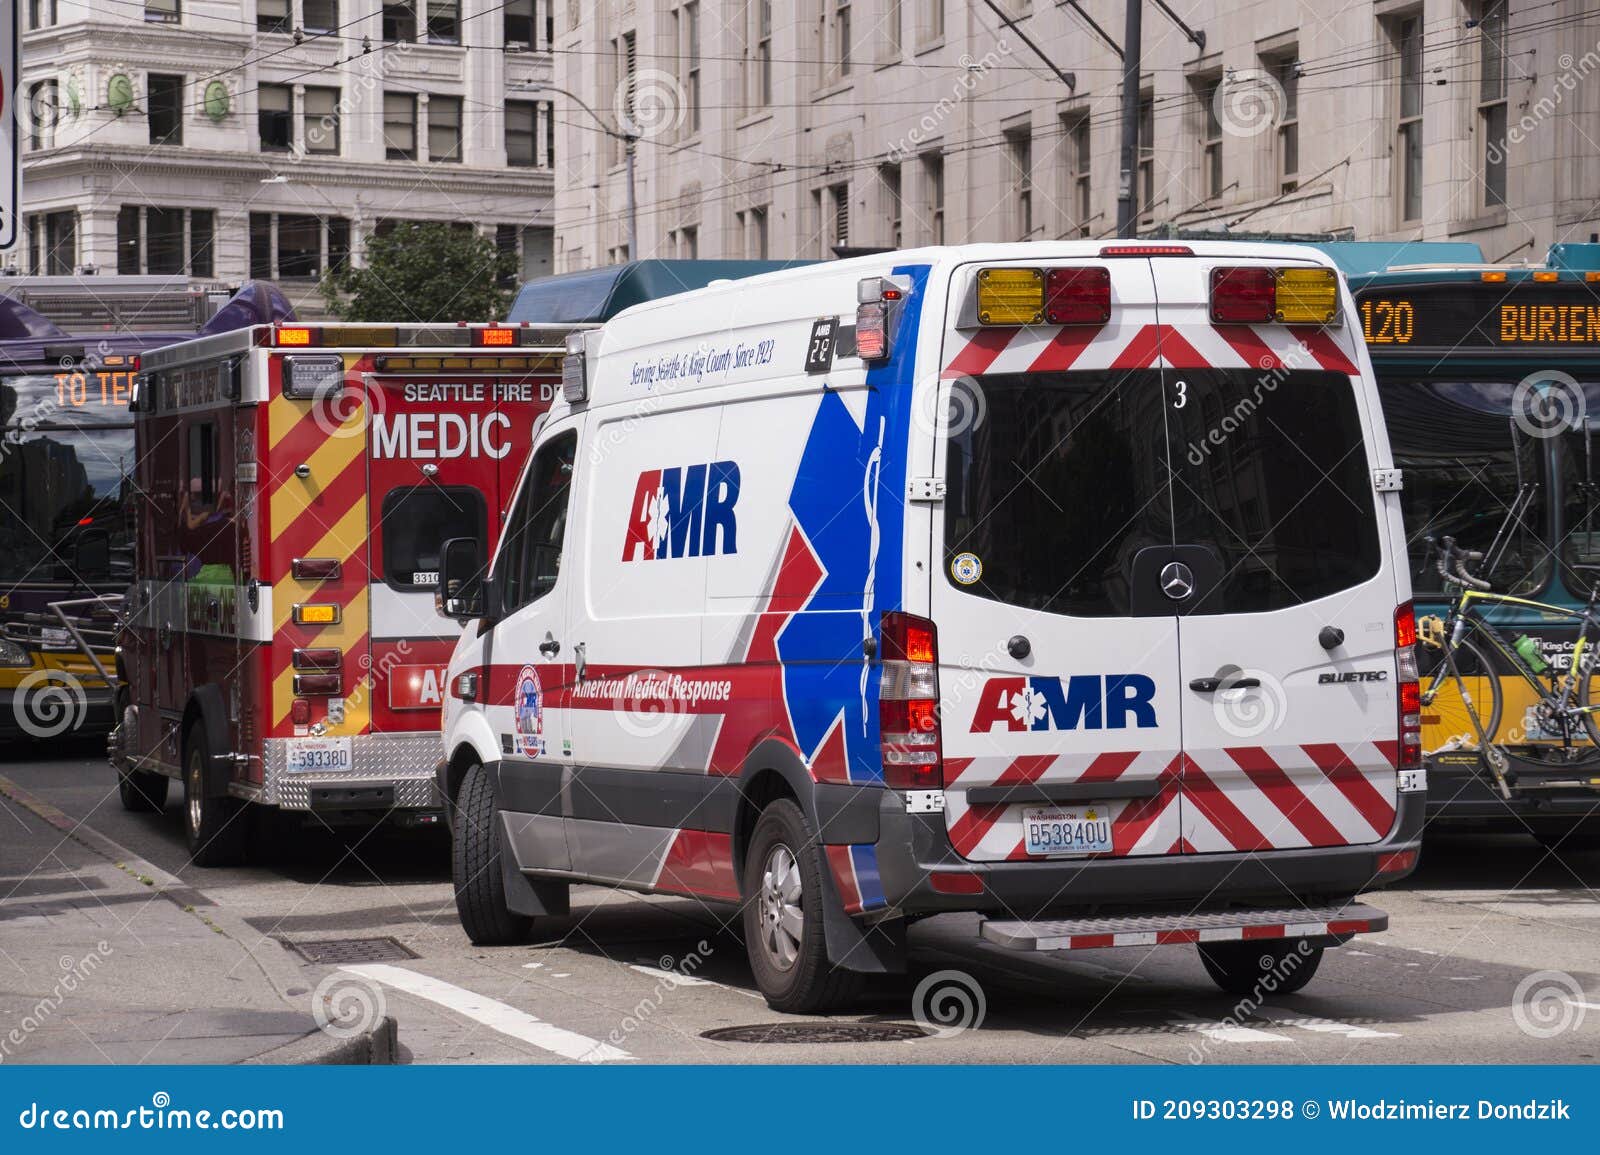 ambulance-american-medical-response-inc-is-a-medical-transportation-company-in-the-united